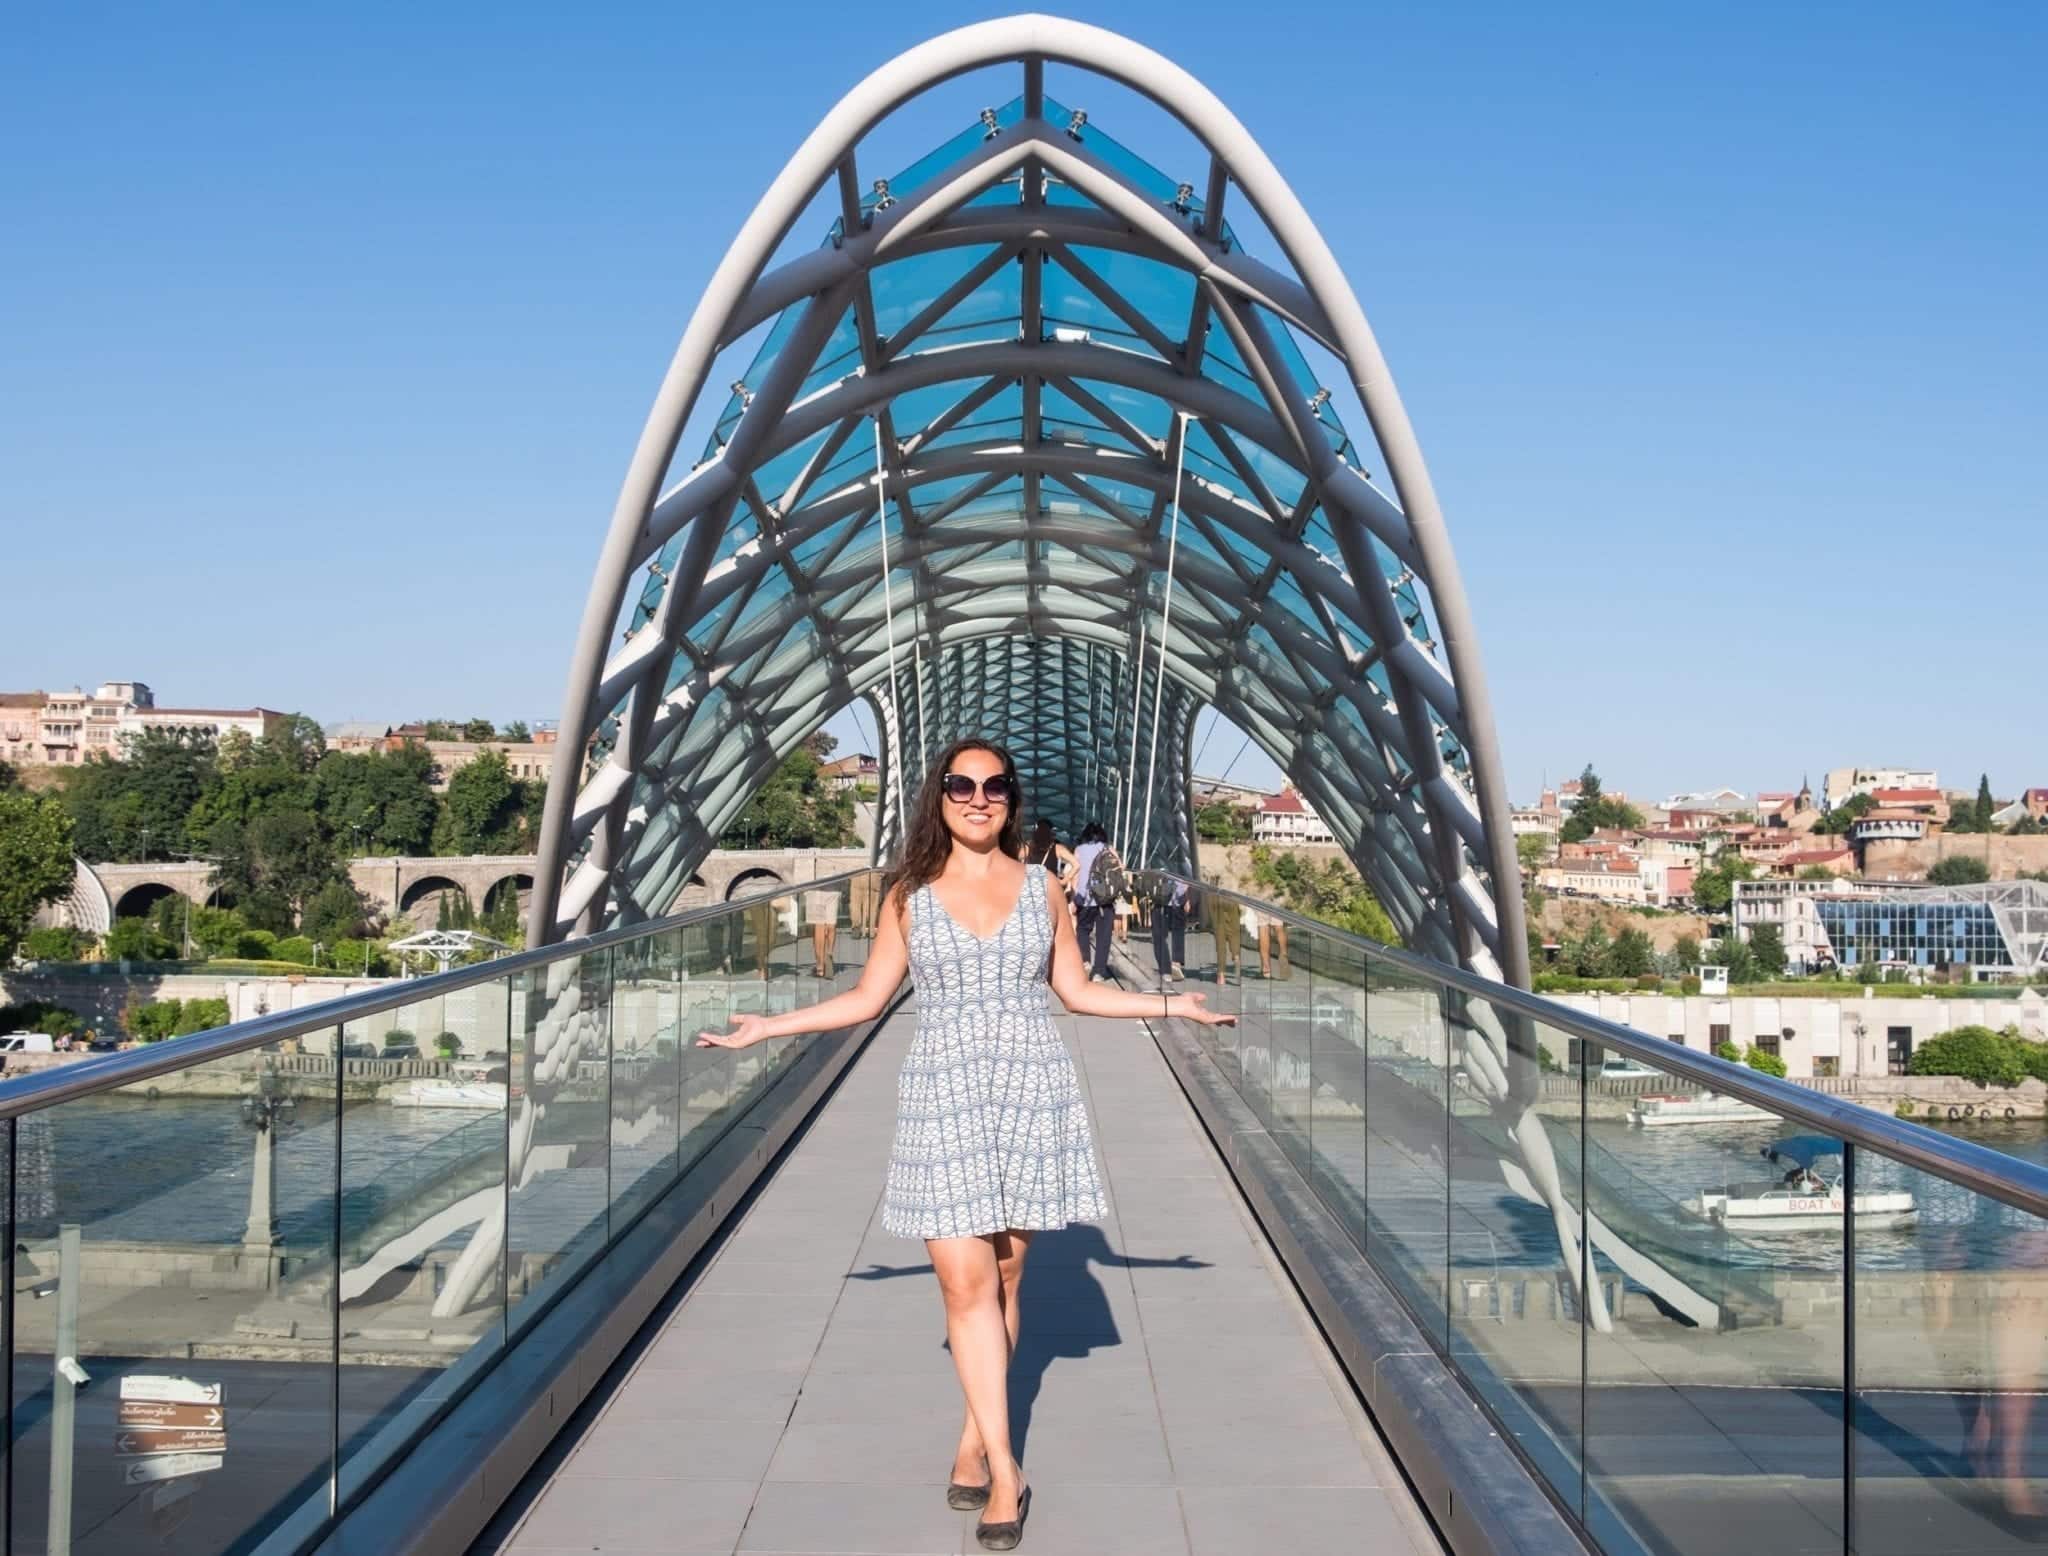 Kate stands in front of the Peace Bridge in Tbilisi, Georgia, which is modern and a grid-like oblong shape interspersed with green-blue panels of glass. Kate wears a white dress with a white and green and blue geometric pattern that looks similar to the bridge.